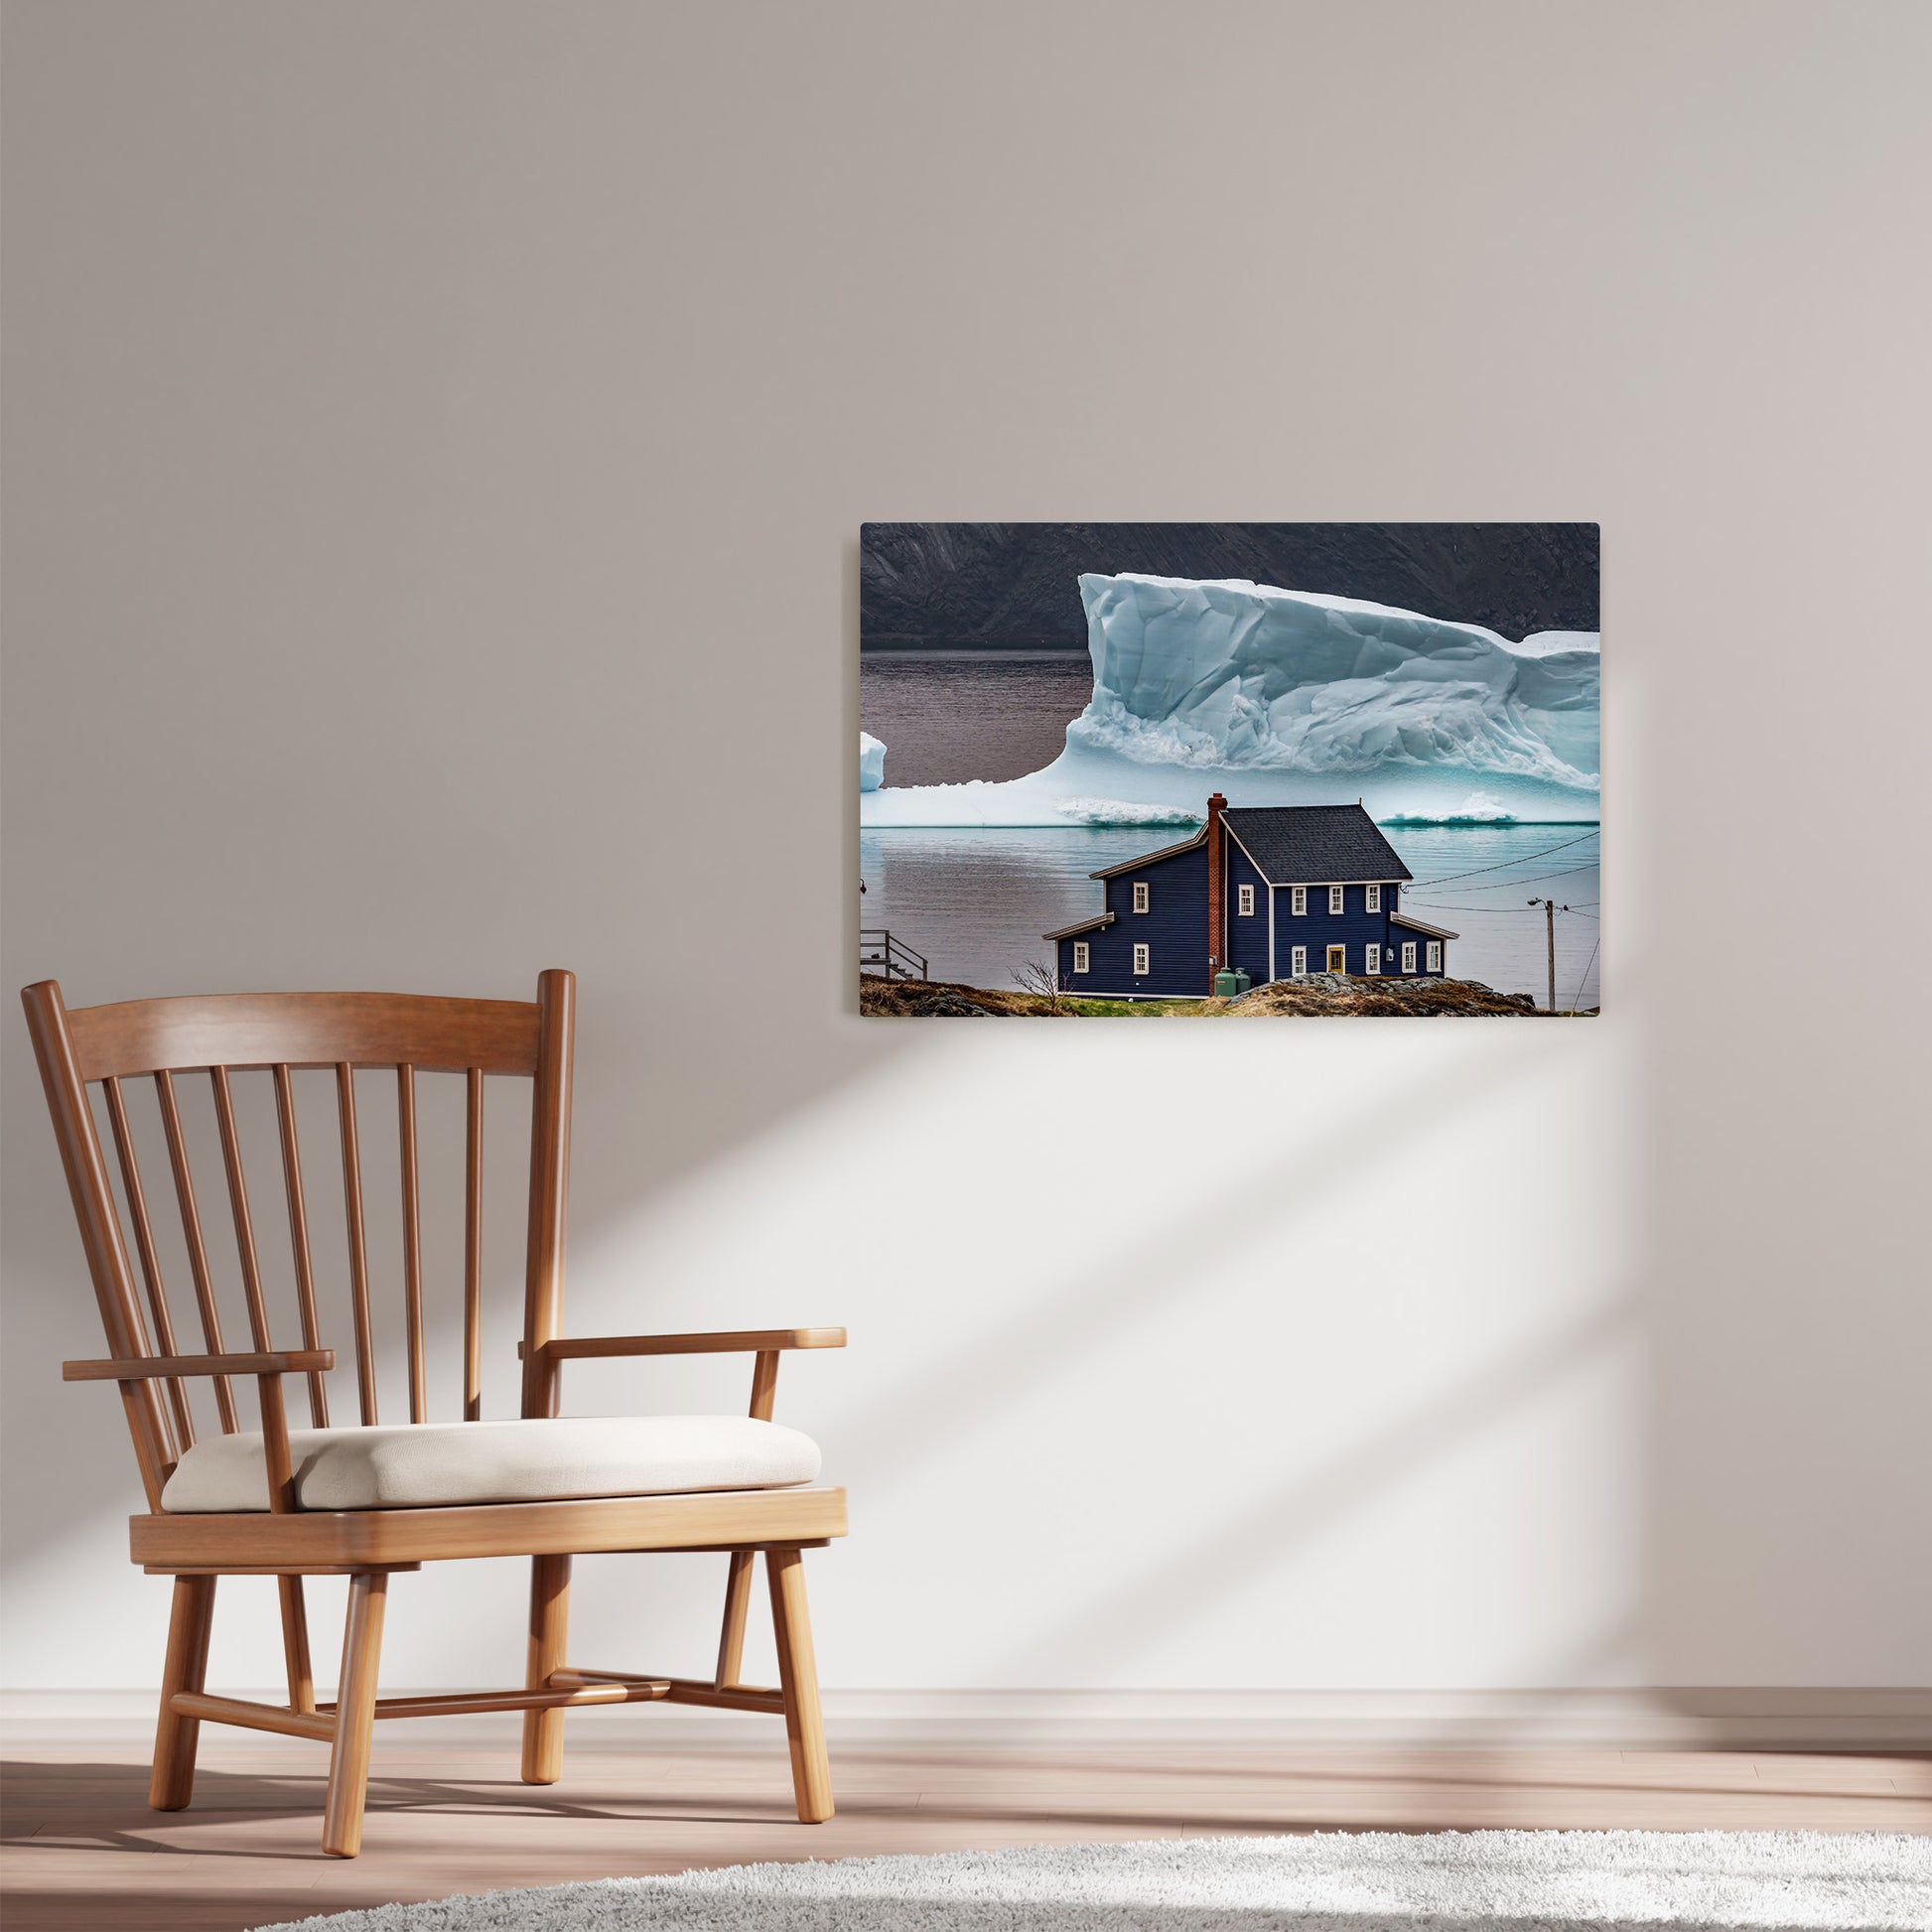 Ray Mackey's Port Rexton Icehouse photography reproduced on HD metal print and displayed on wall